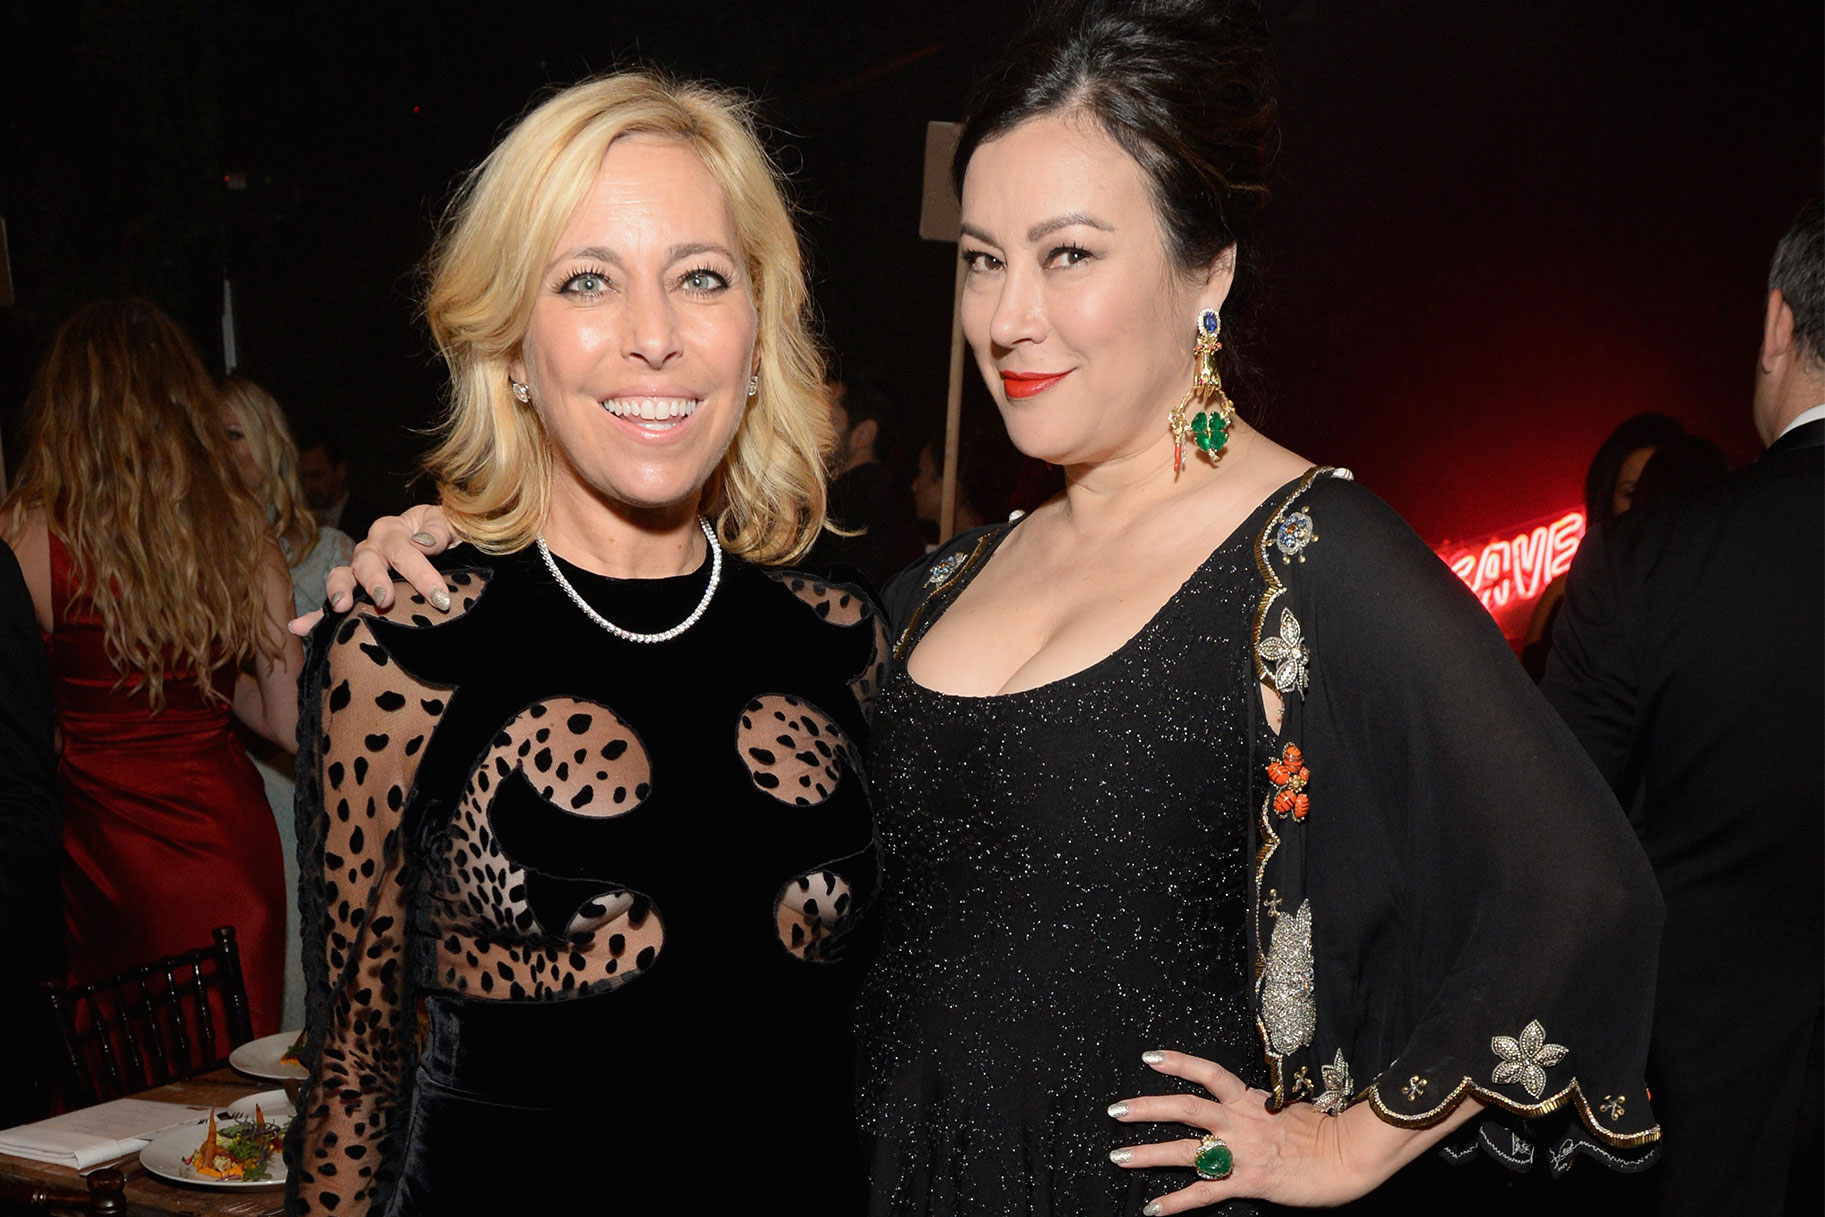 Sutton Stracke and Jennifer Tilly posed together. Both are wearing black dresses